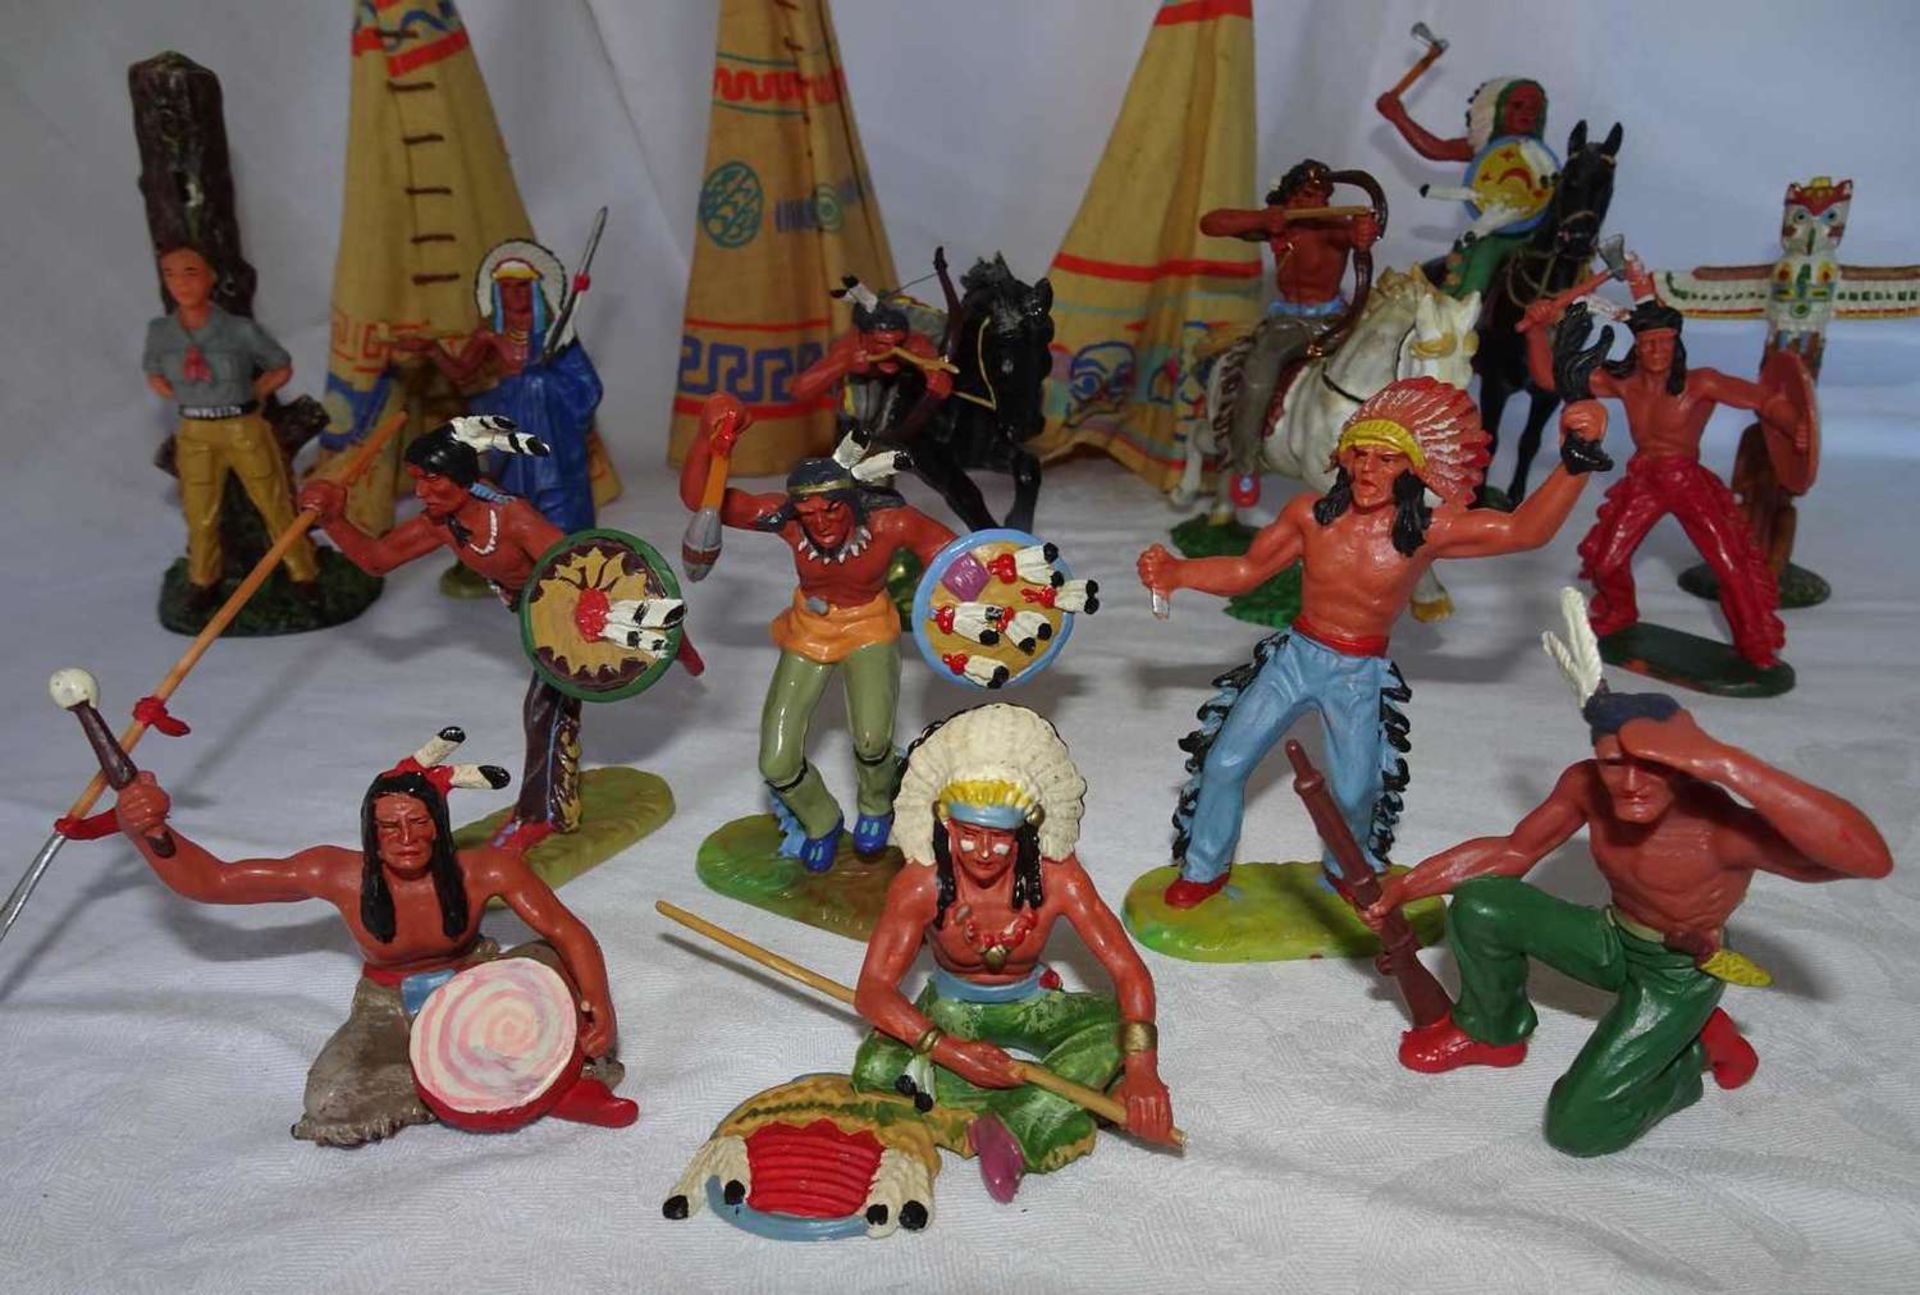 Large lot of Elastolin plastic figures, 7 cm series, Indians, with 3 Indians on horse. A total of 14